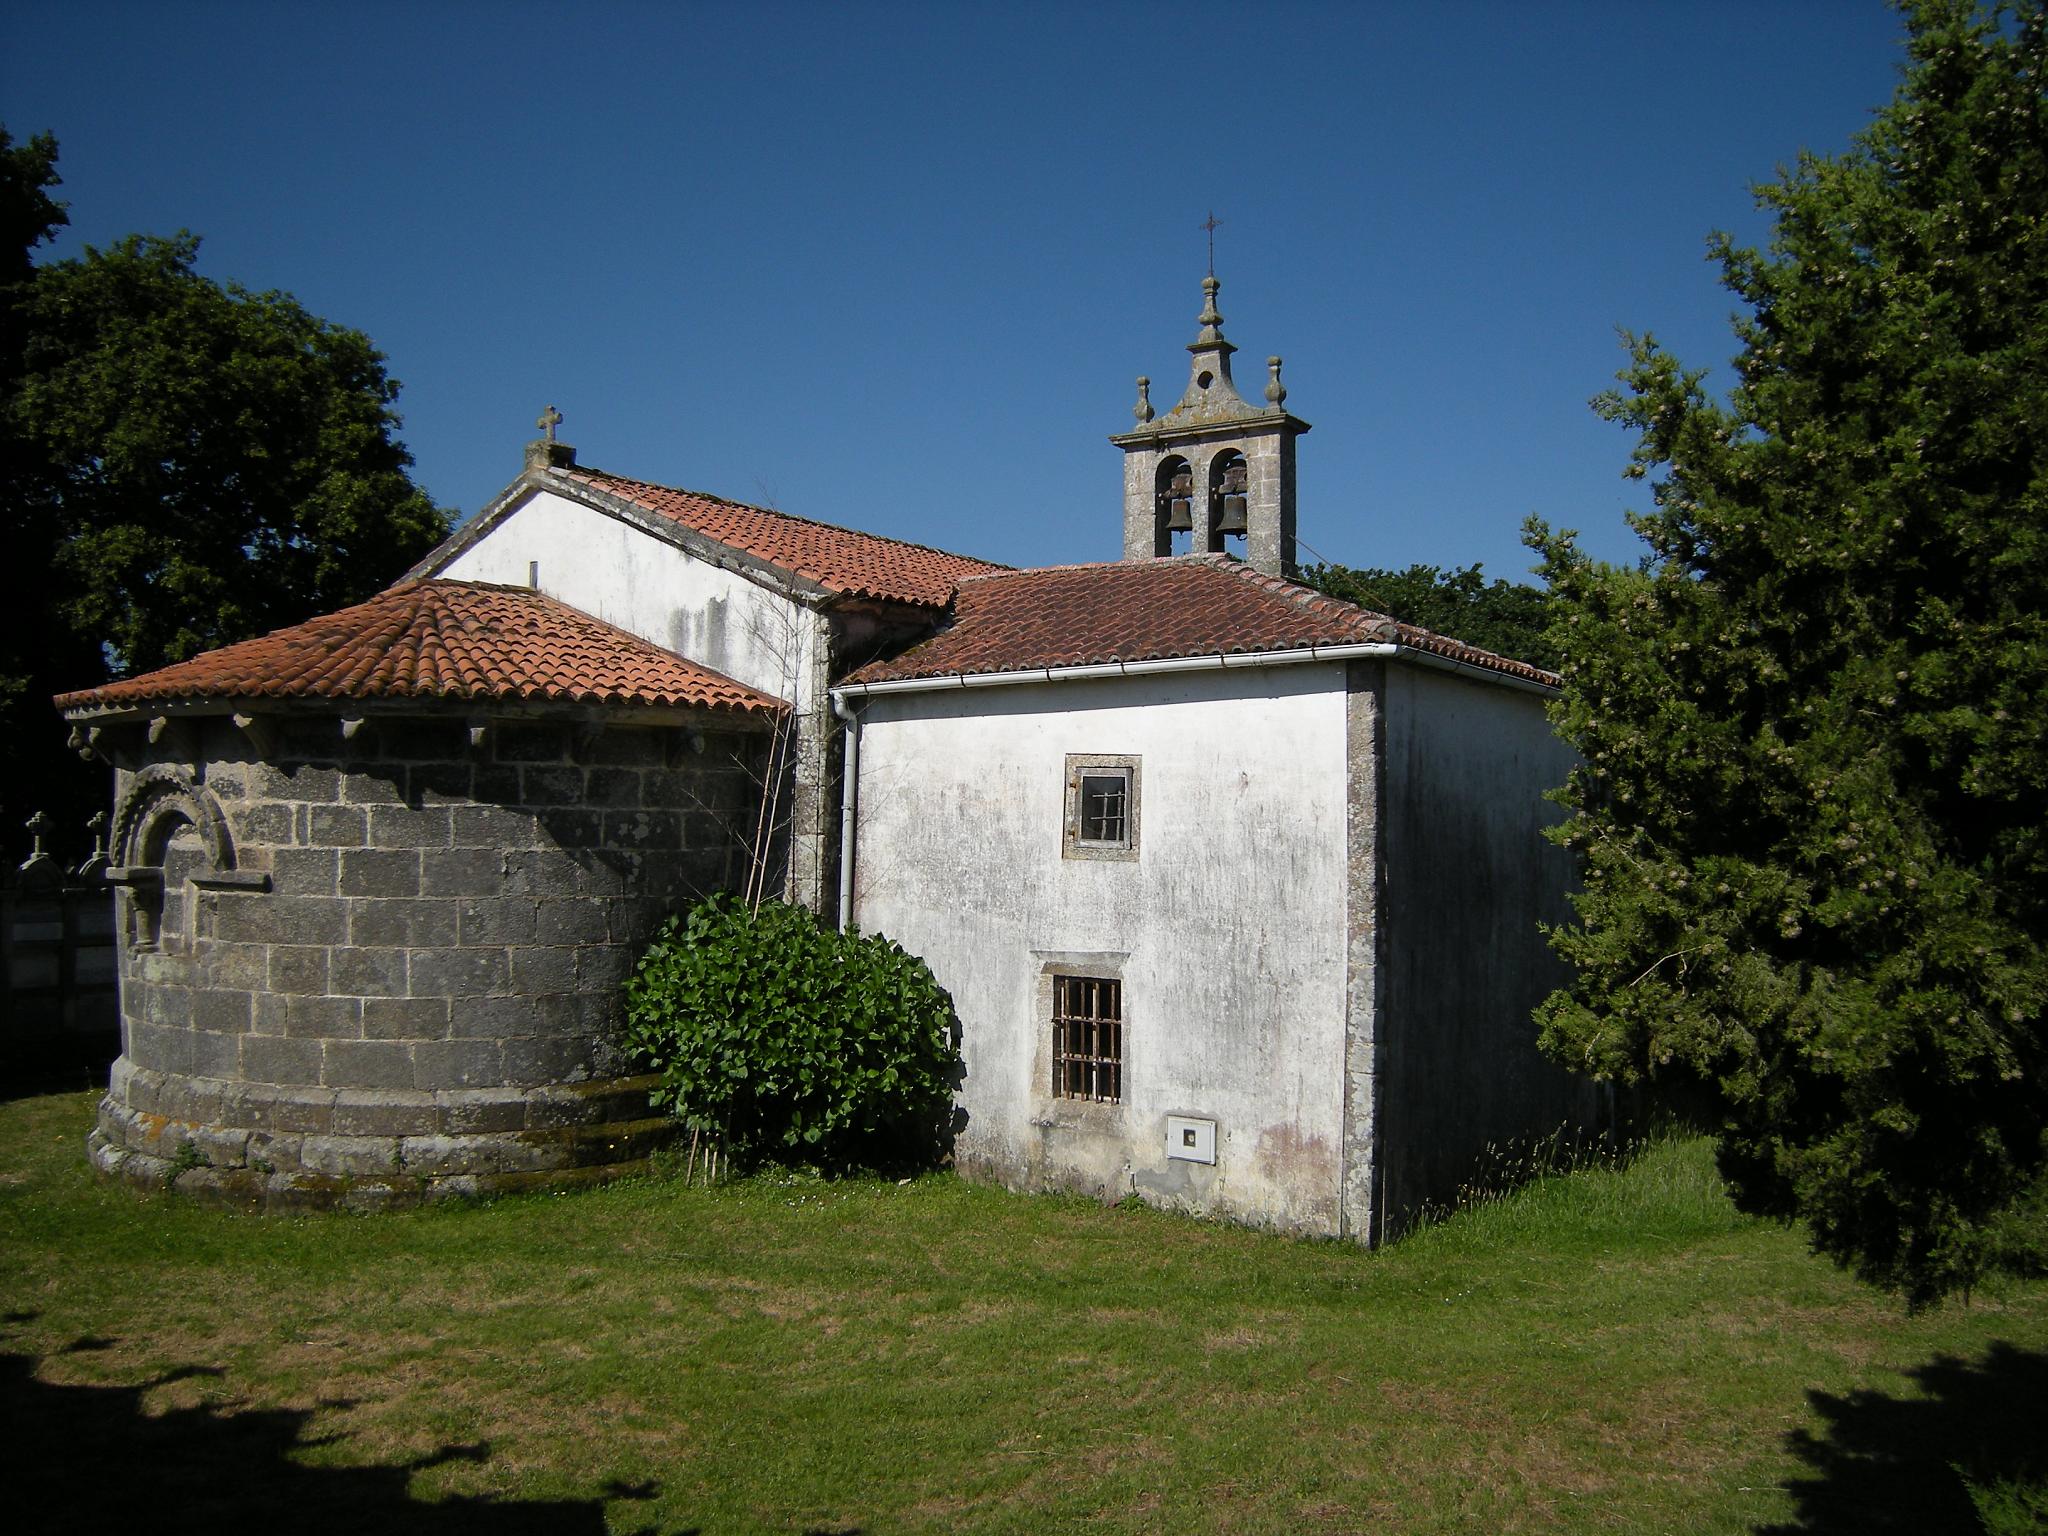 there is an old church building in the green grass